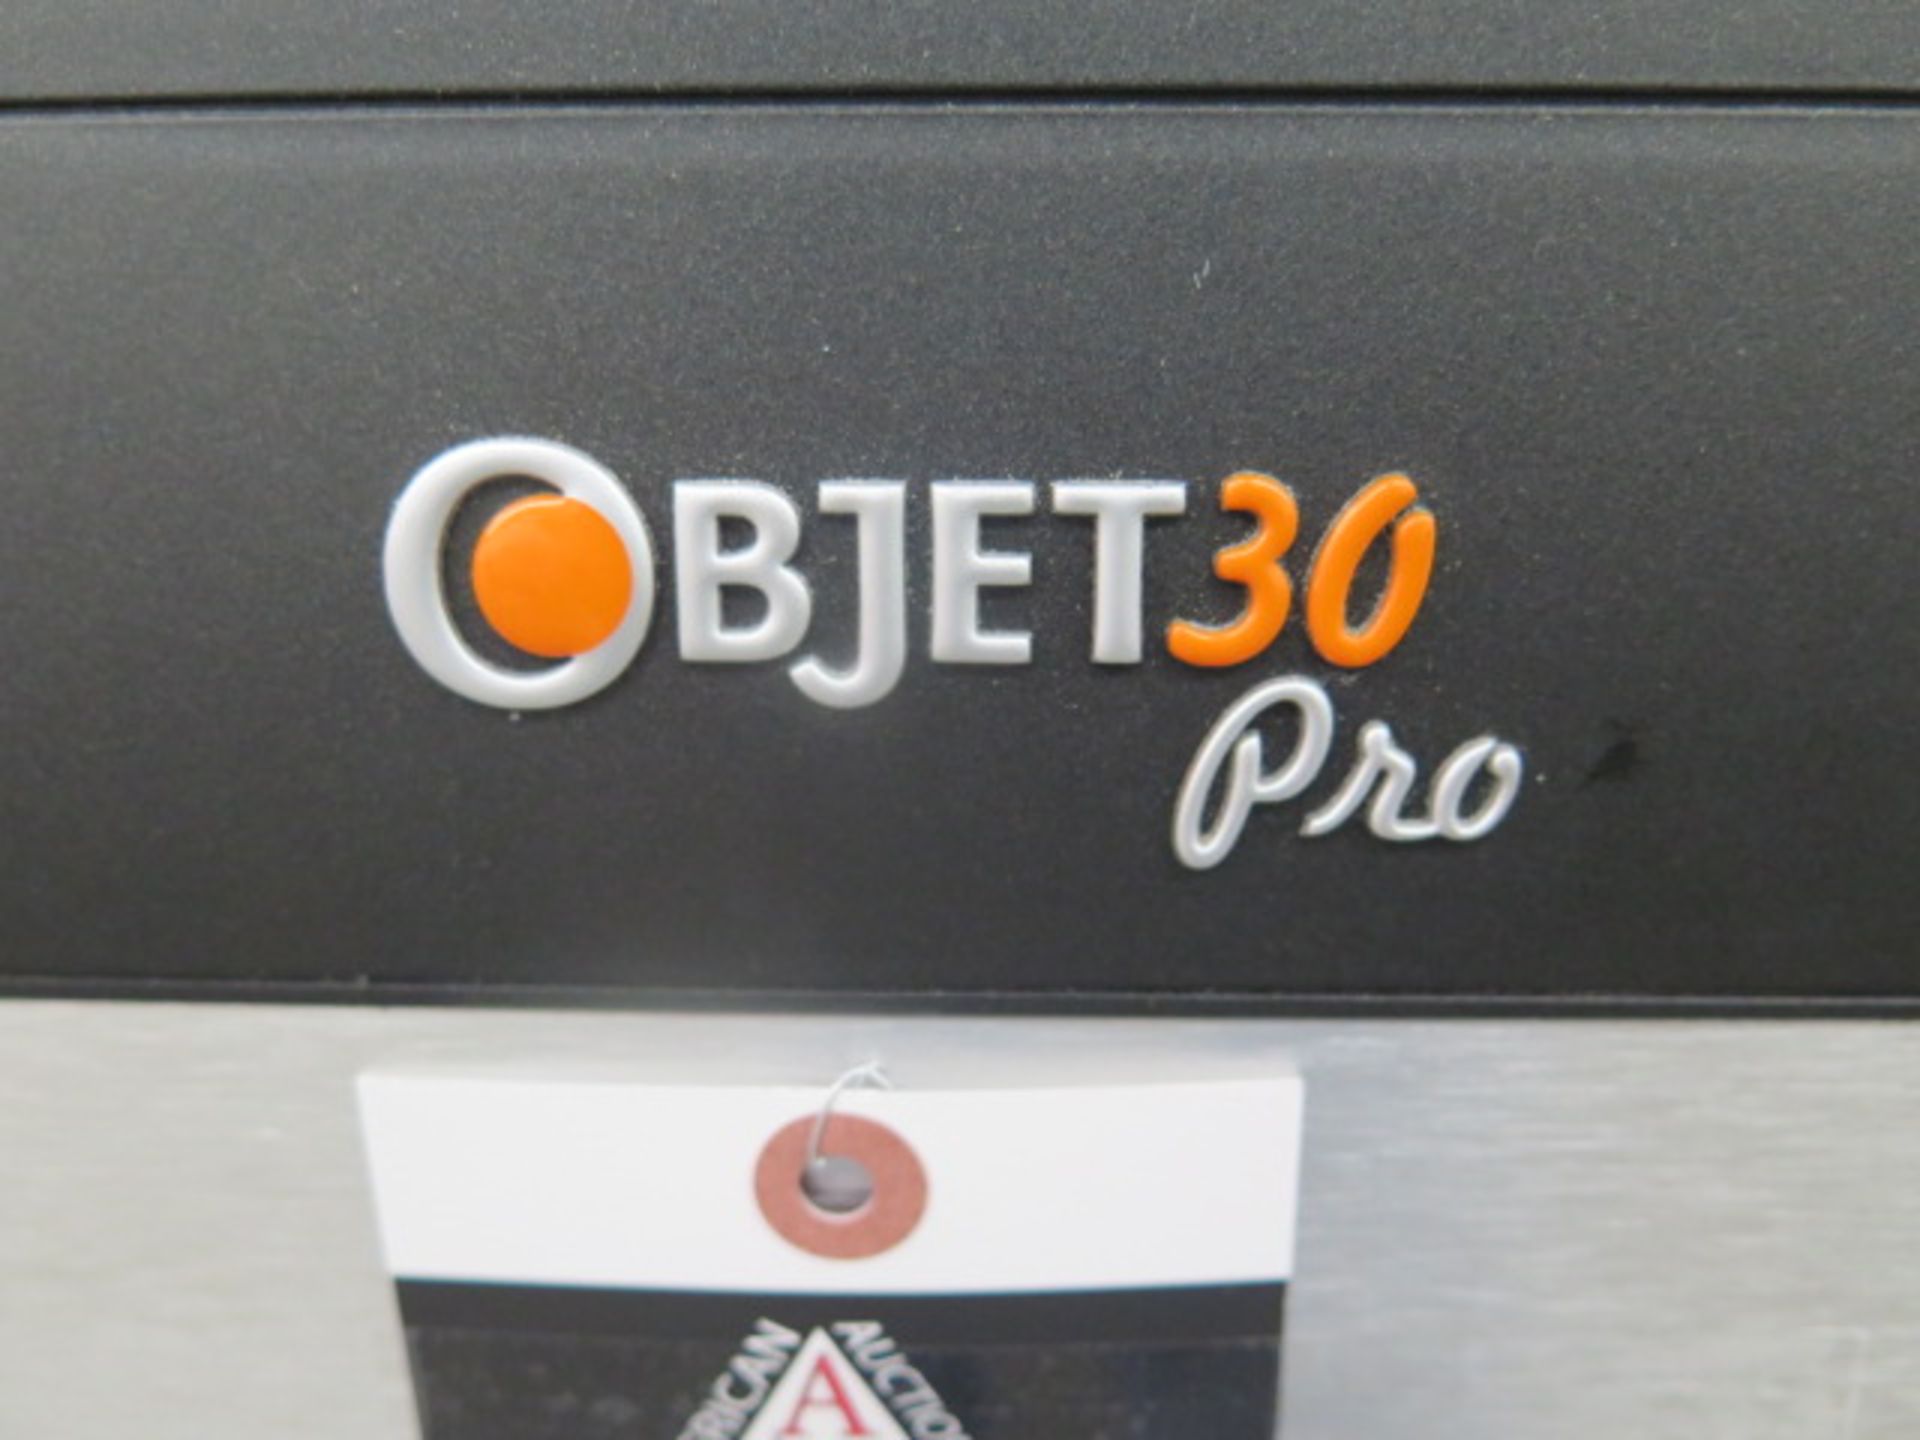 2013 Stratasys OBJET 30 Pro Industrial 3D Printer s/n 2240311 w/ Stratasys Controls, SOLD AS IS - Image 7 of 25